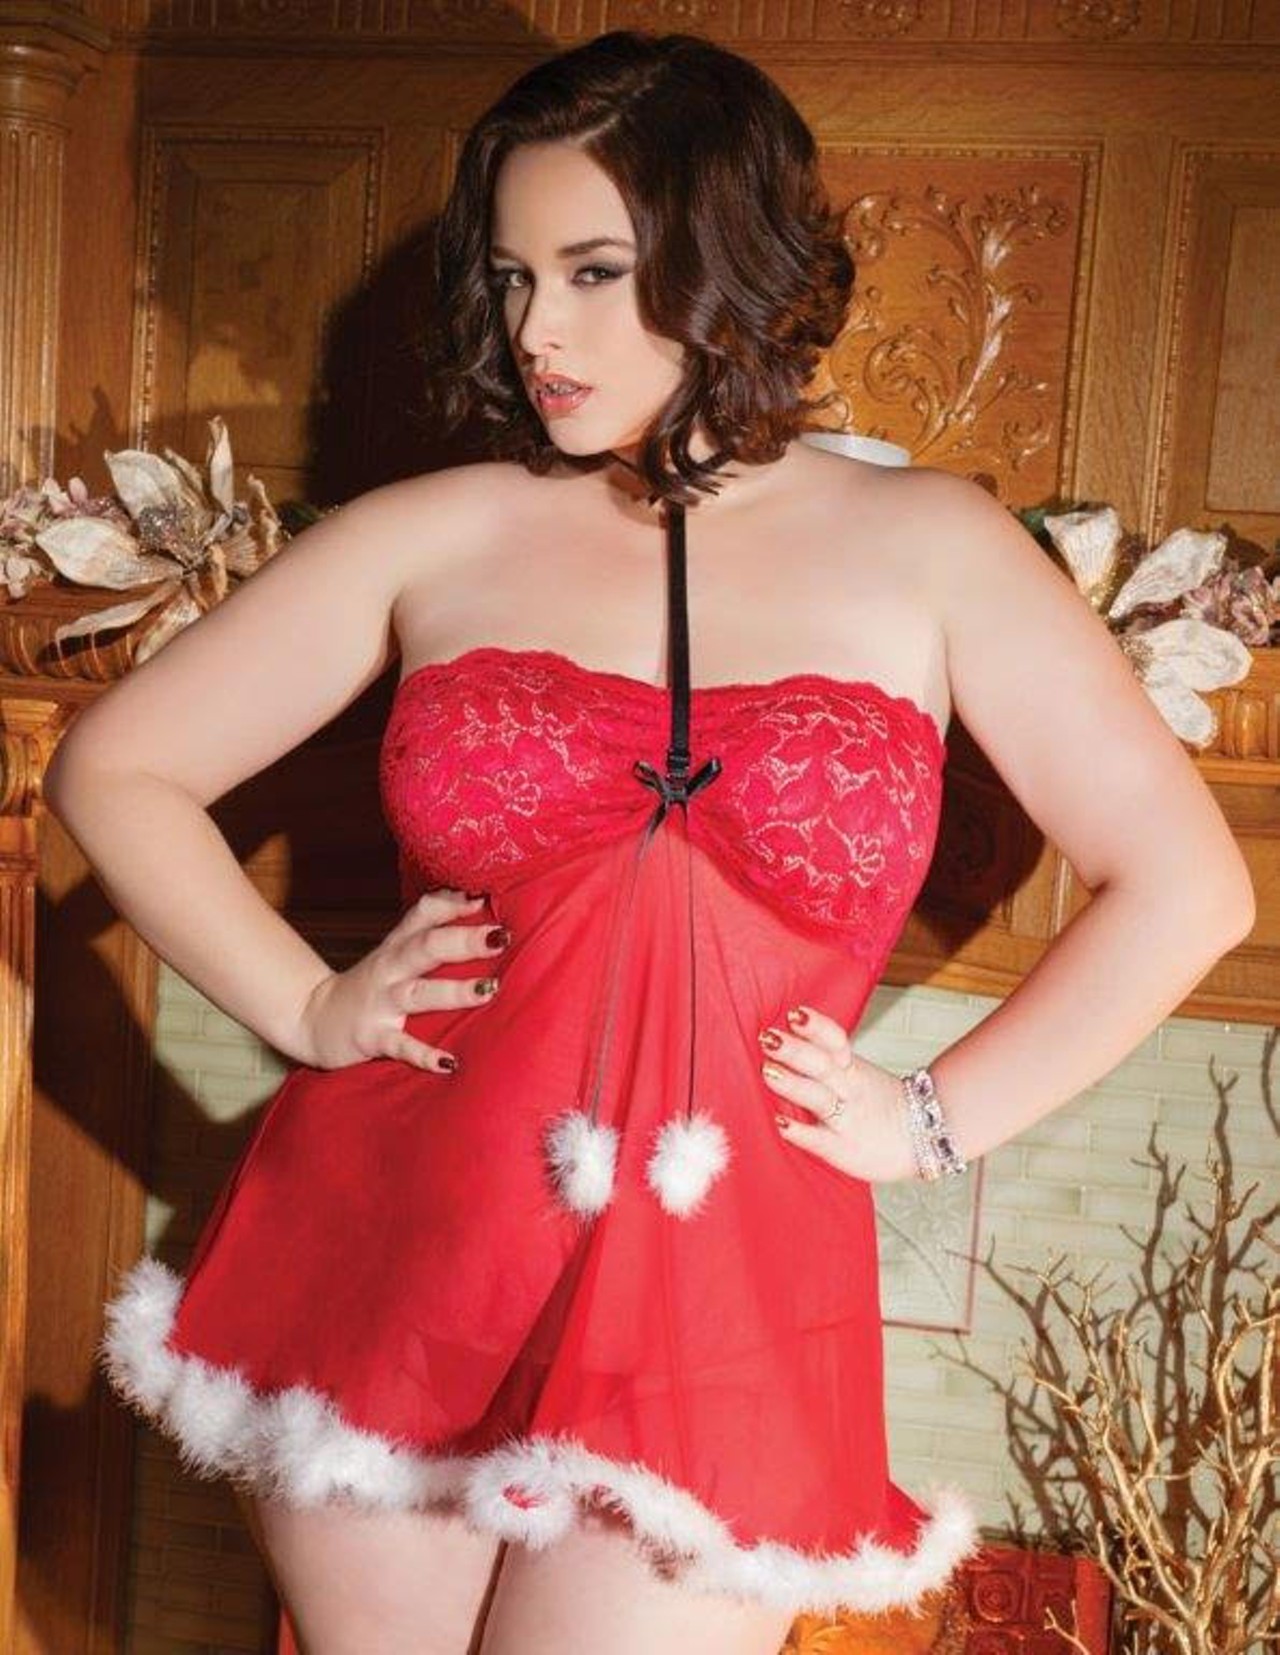 20 NSFW outfits from Lover's Lane to heat up the holidays this season